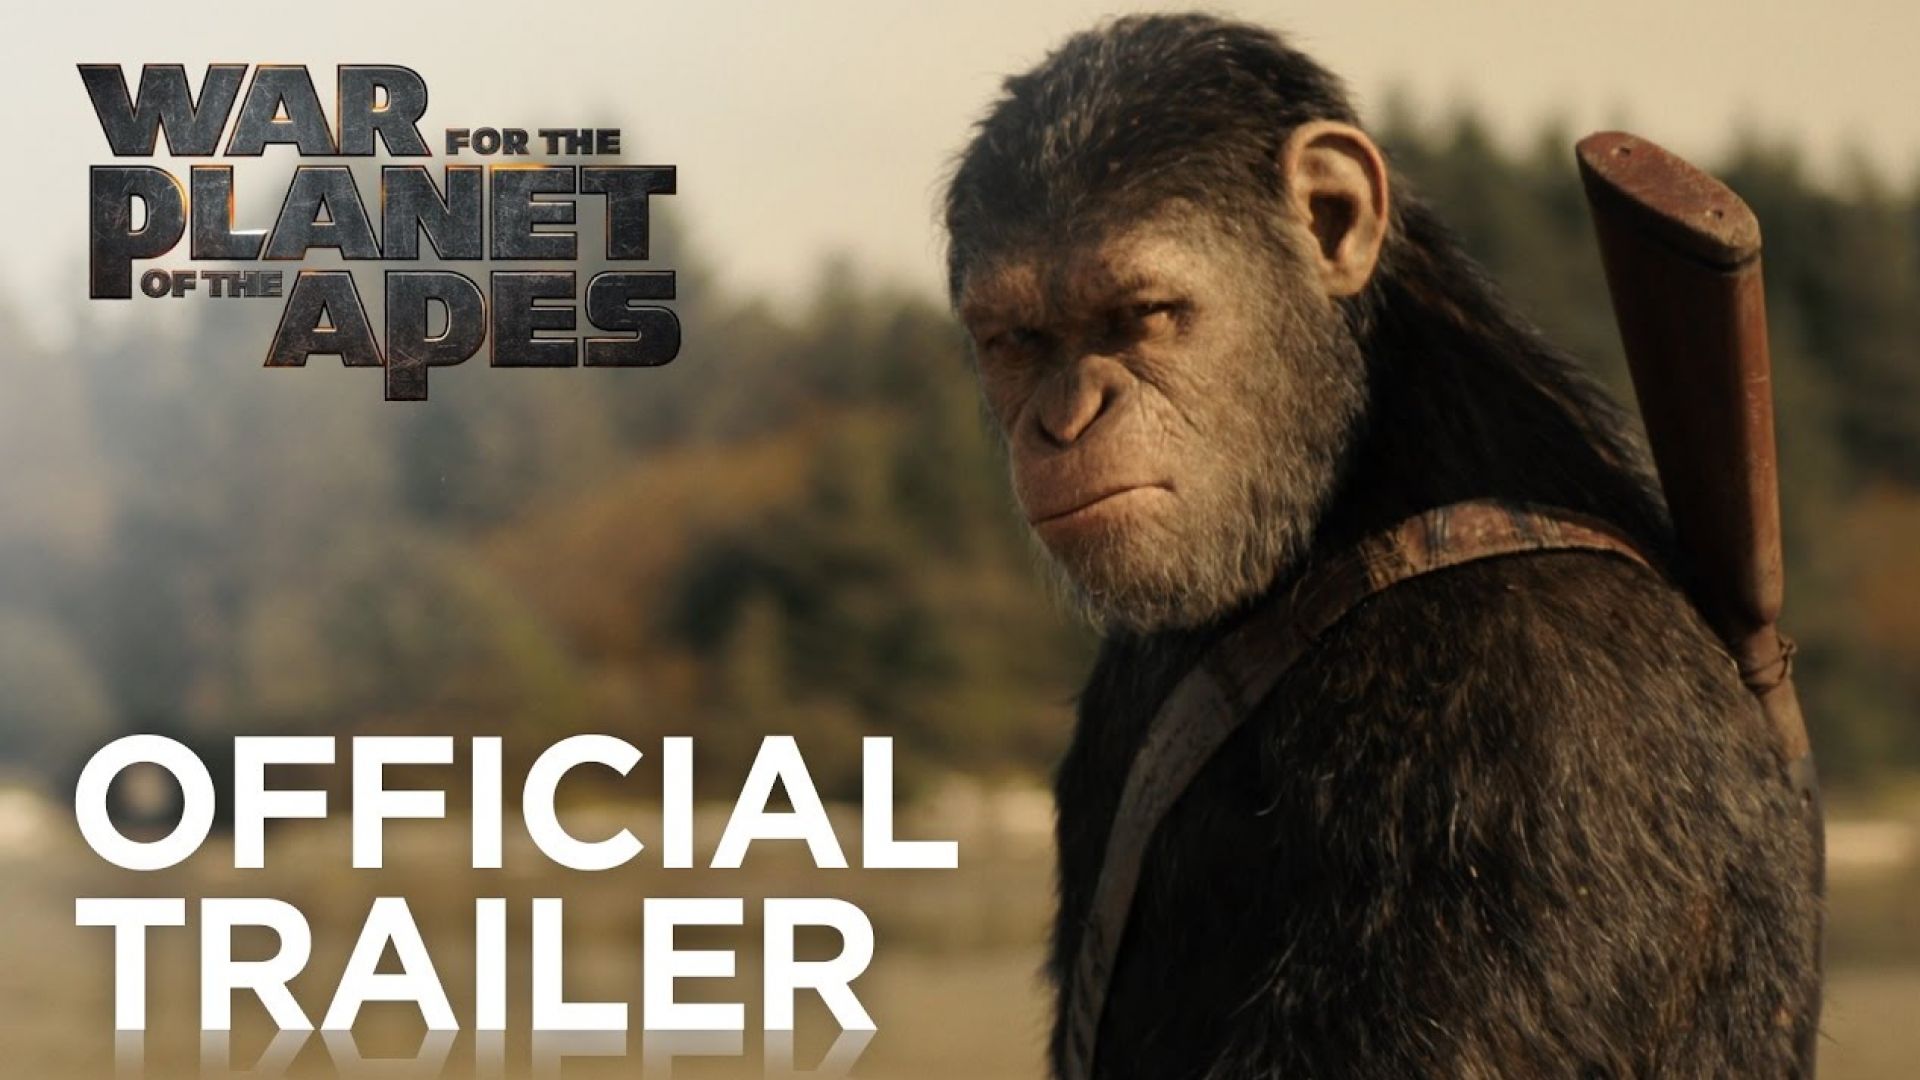 &#039;War For The Planet of The Apes&#039; Official Trailer. In theate